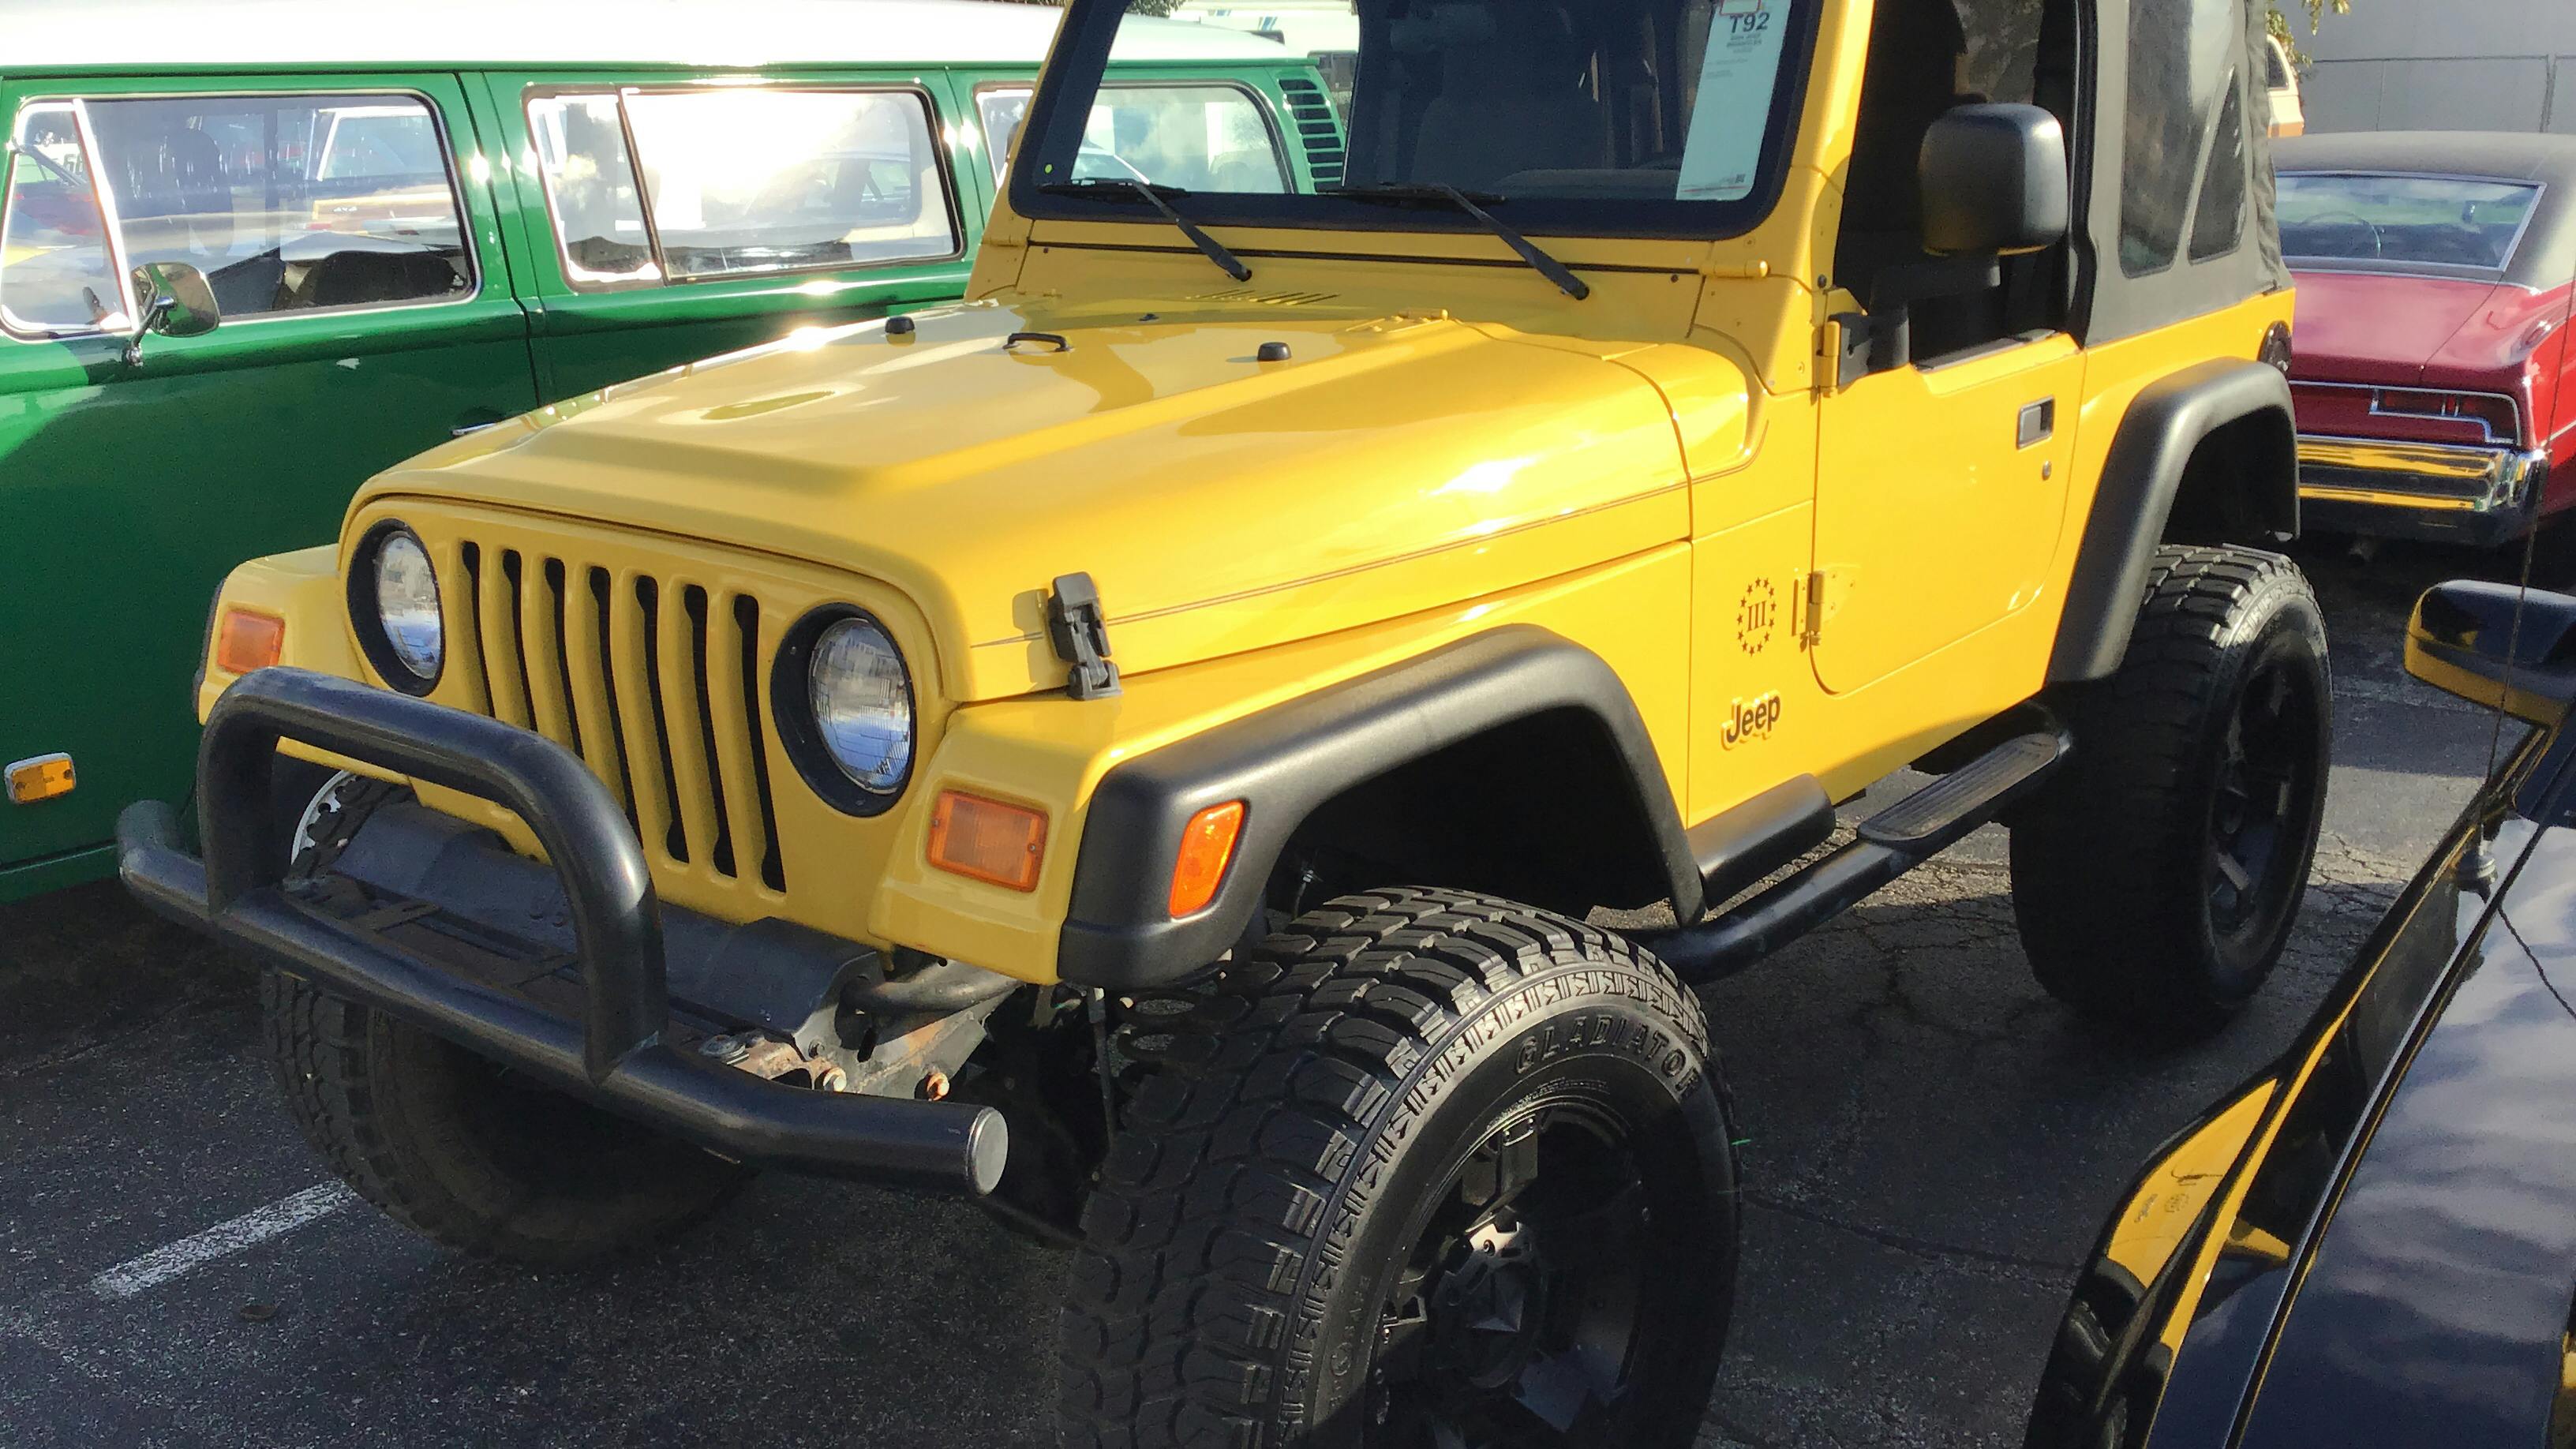 1996 Jeep Wrangler SE | Hagerty Valuation Tools